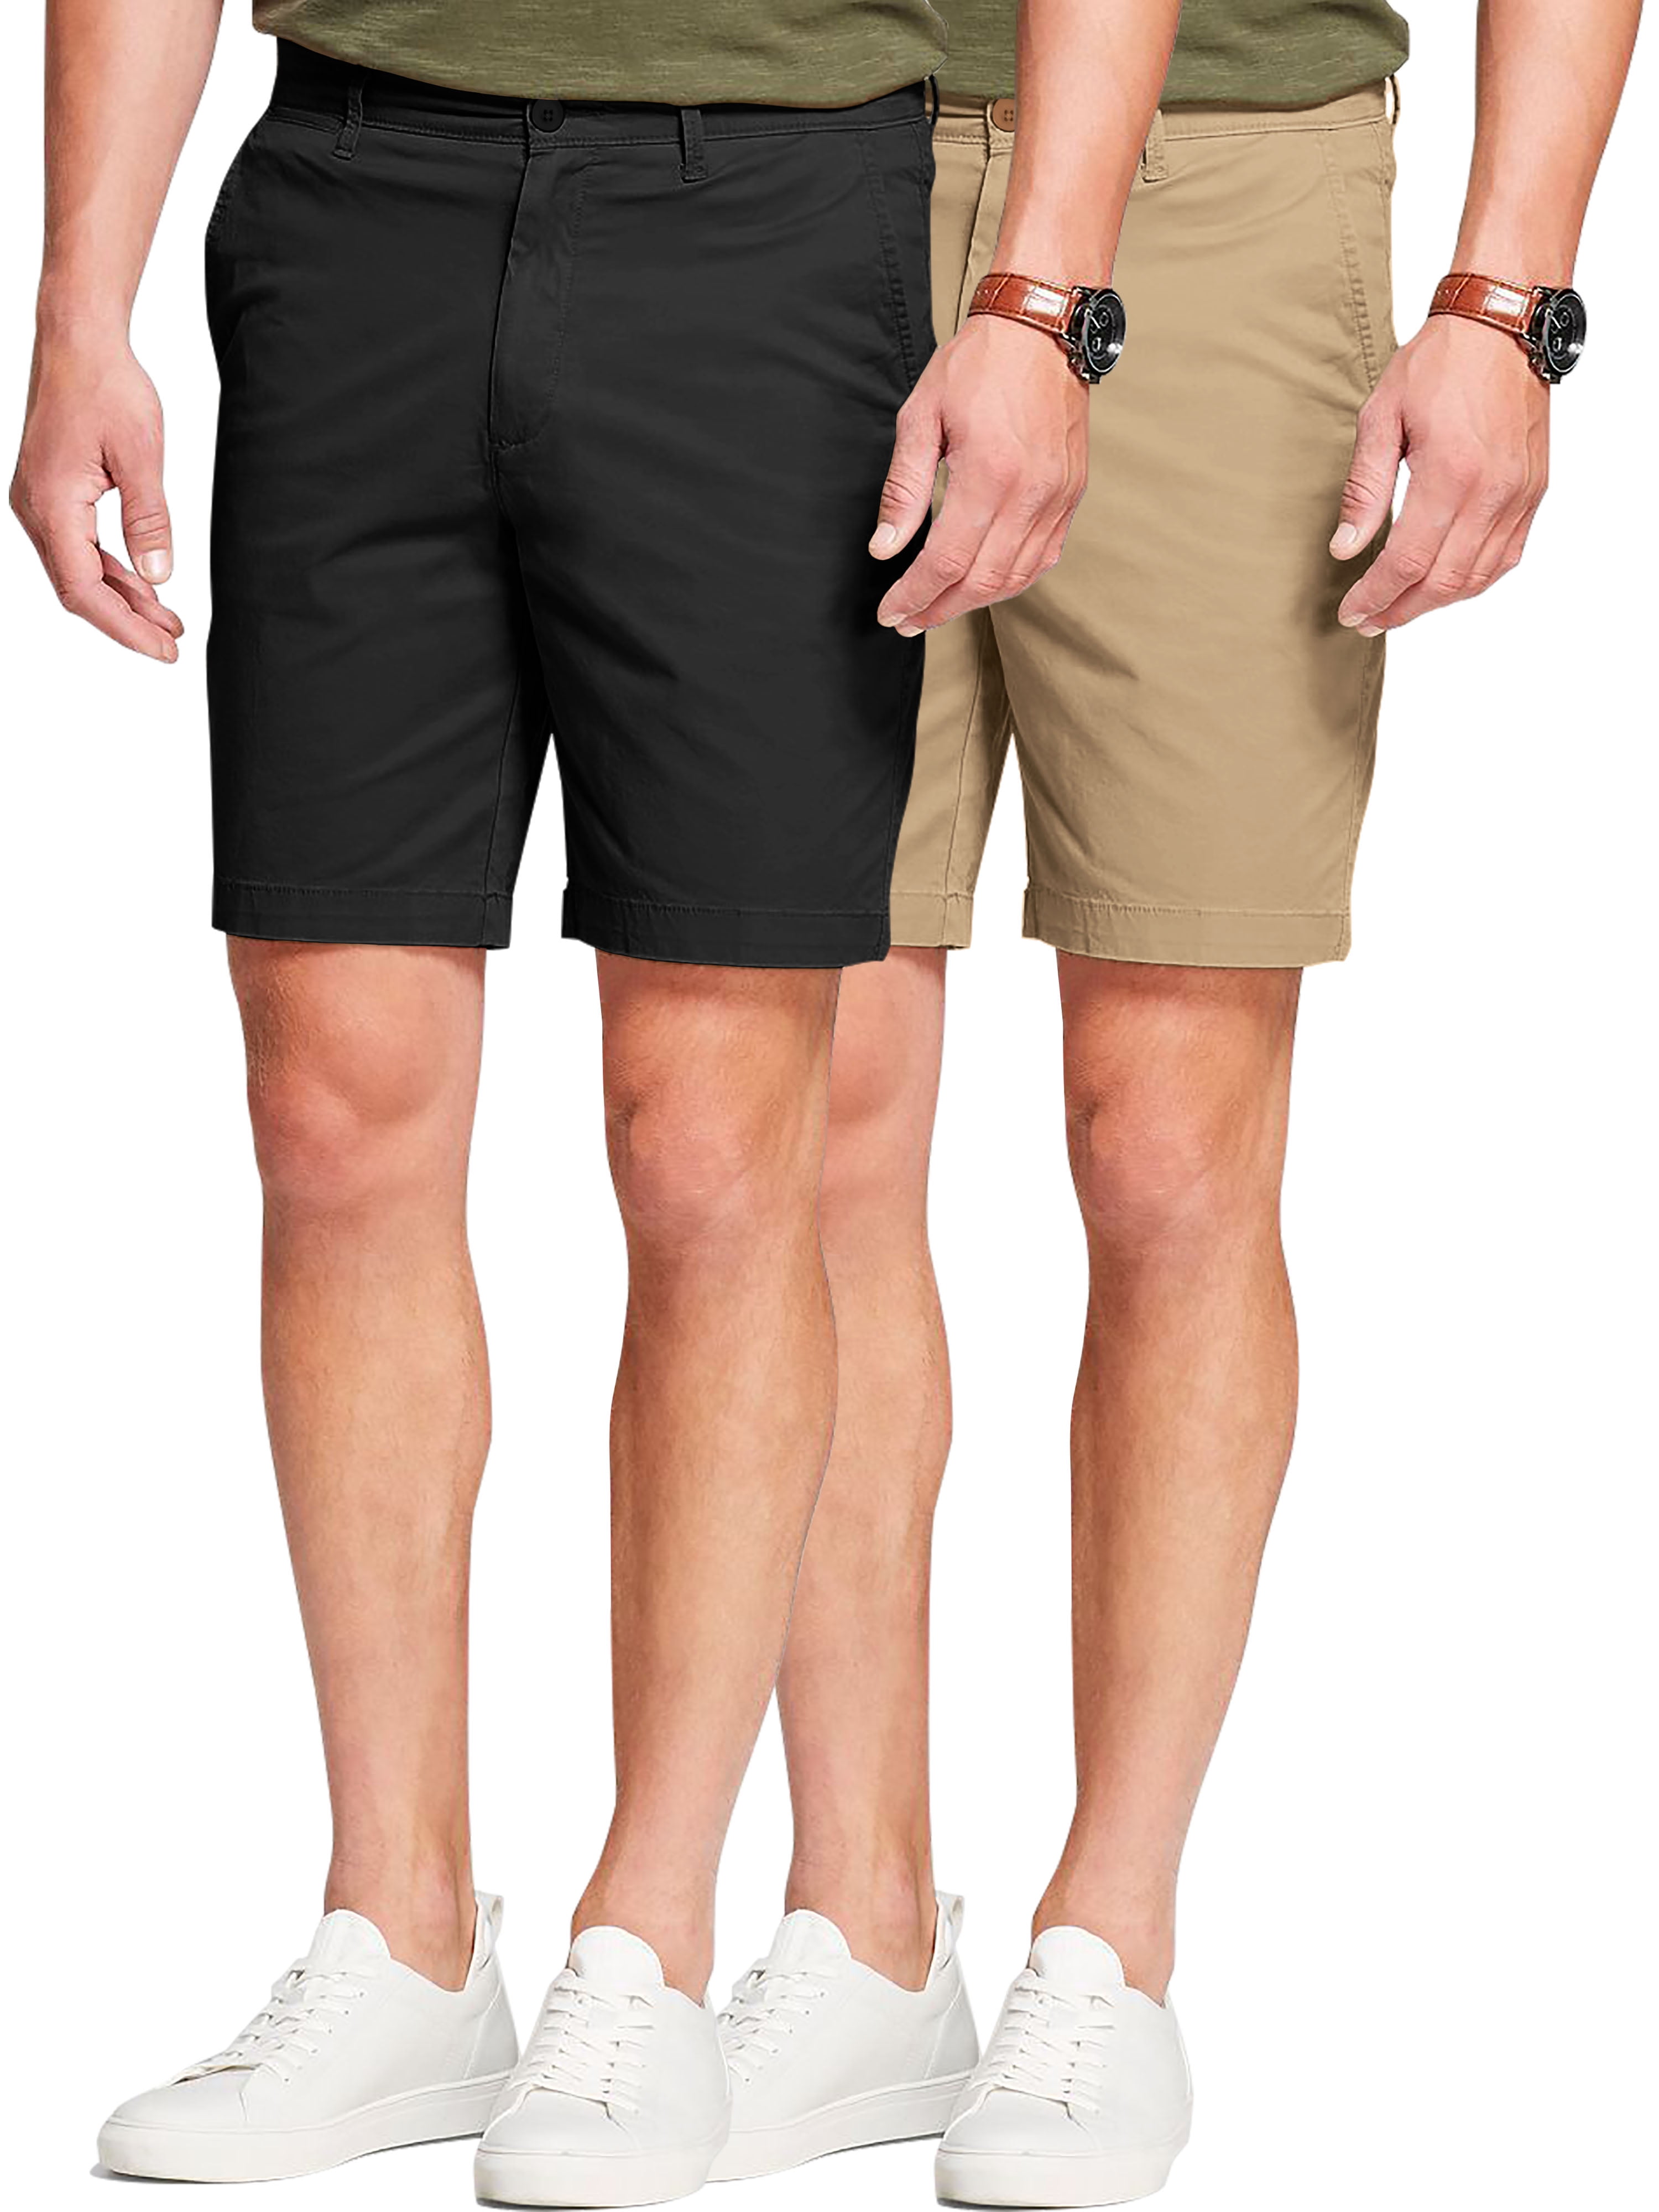 Shorts Adults GDT Premium Dickies